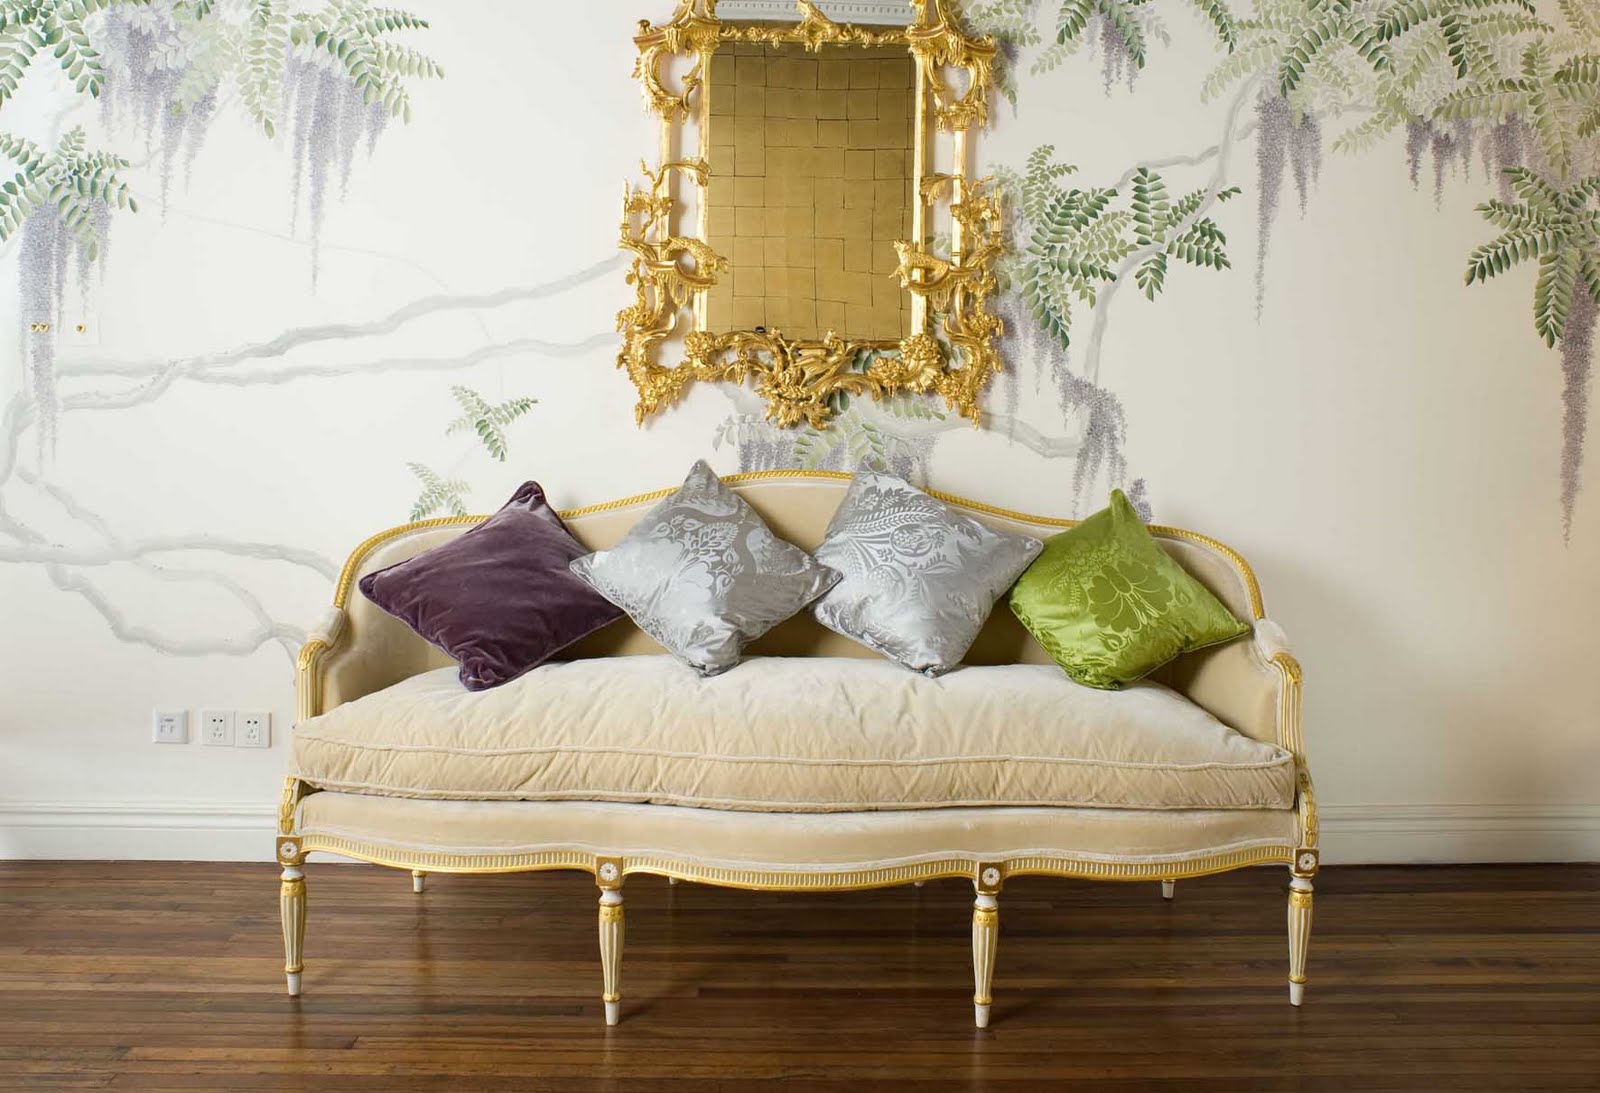 ... wallpaper-french-settee-pillows-gold-mirror-eclectic-home-decor-ideas